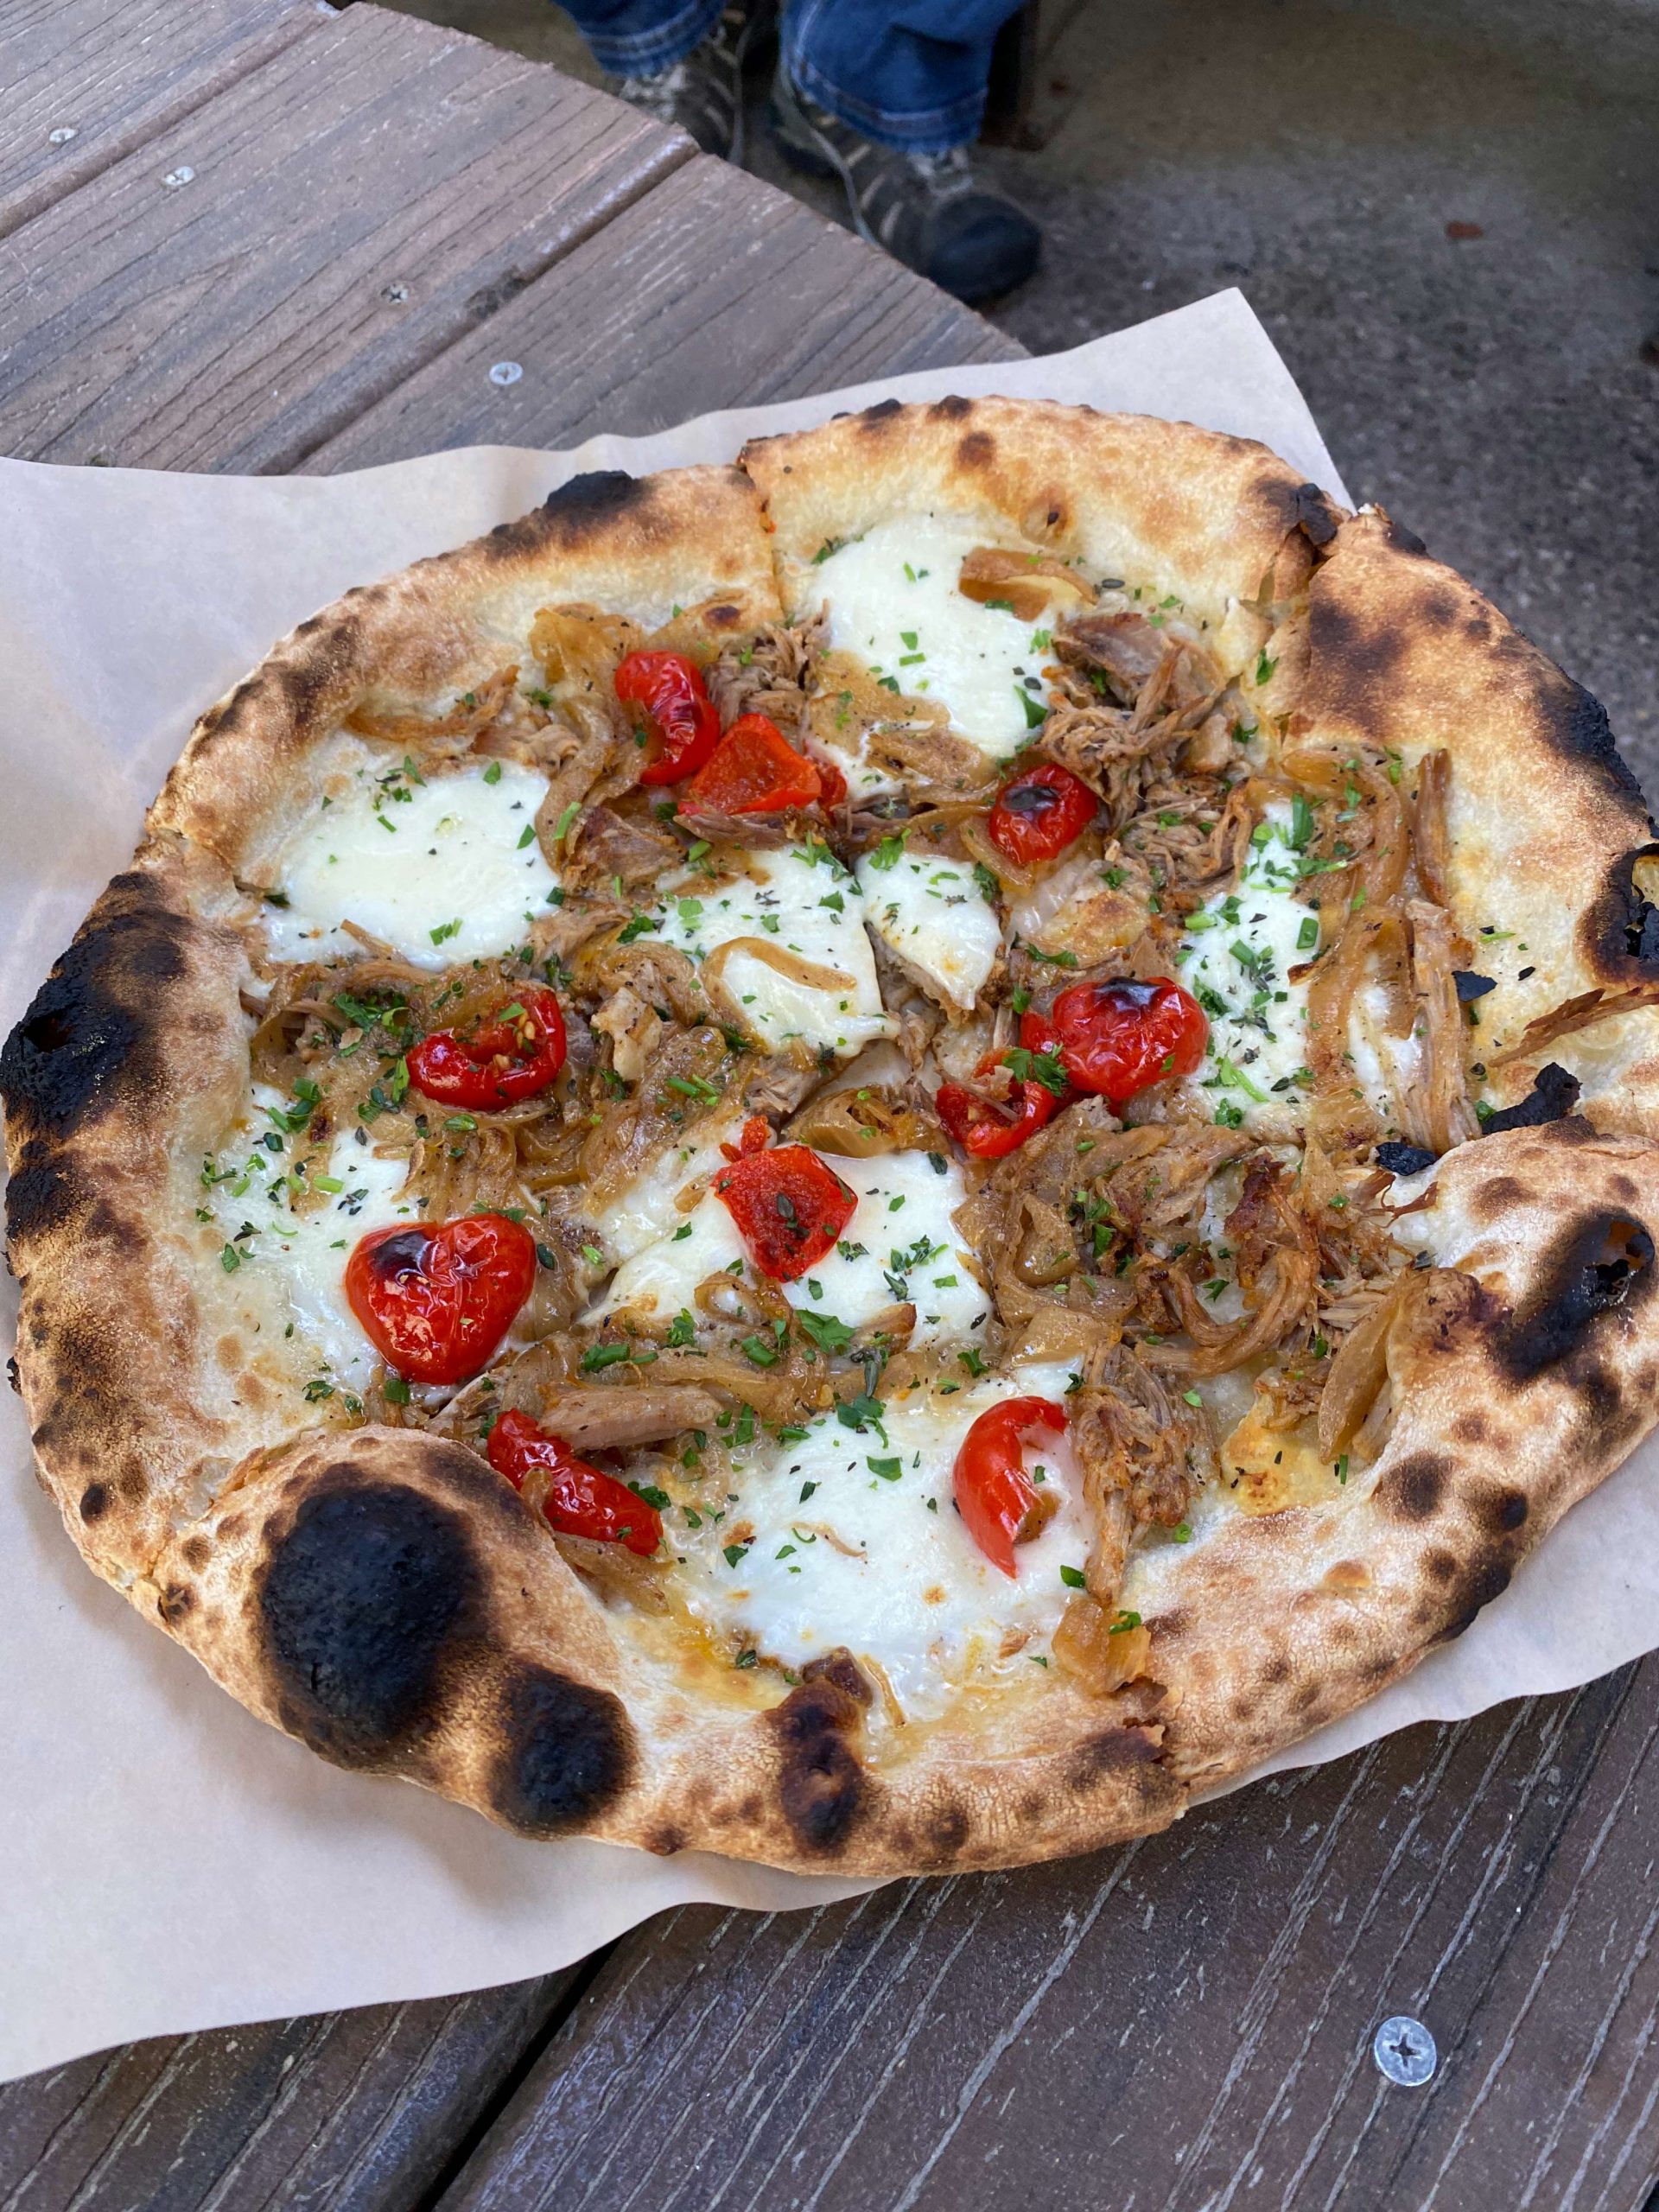 Pizza with pulled pork, peddadew peppers, fresh mozzarella and herbs at Pedal Haus Brewery in Tempe. Photo credit Matthew Johnson.